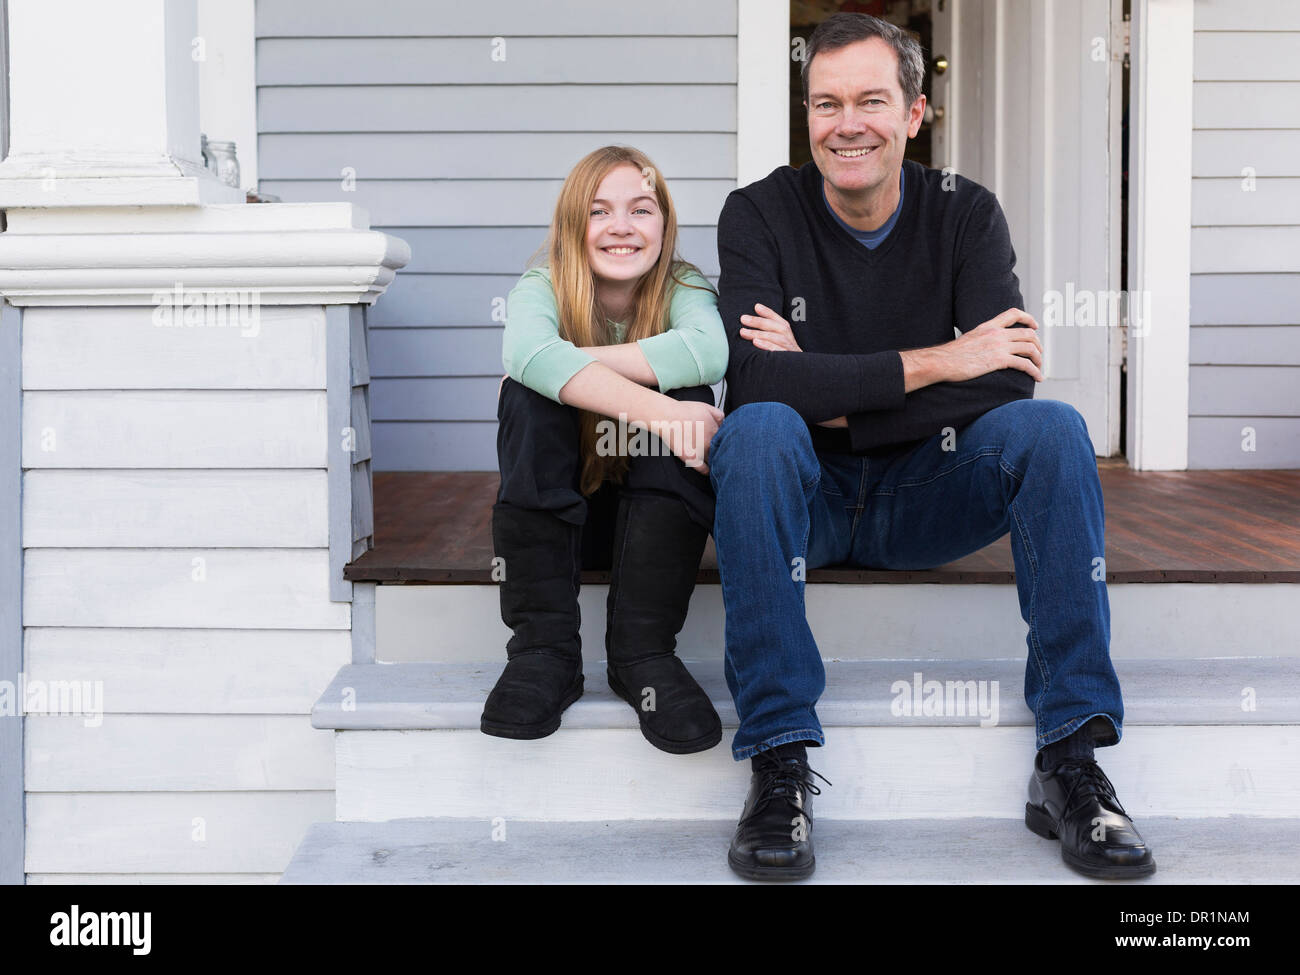 Caucasian father and daughter smiling on steps Banque D'Images